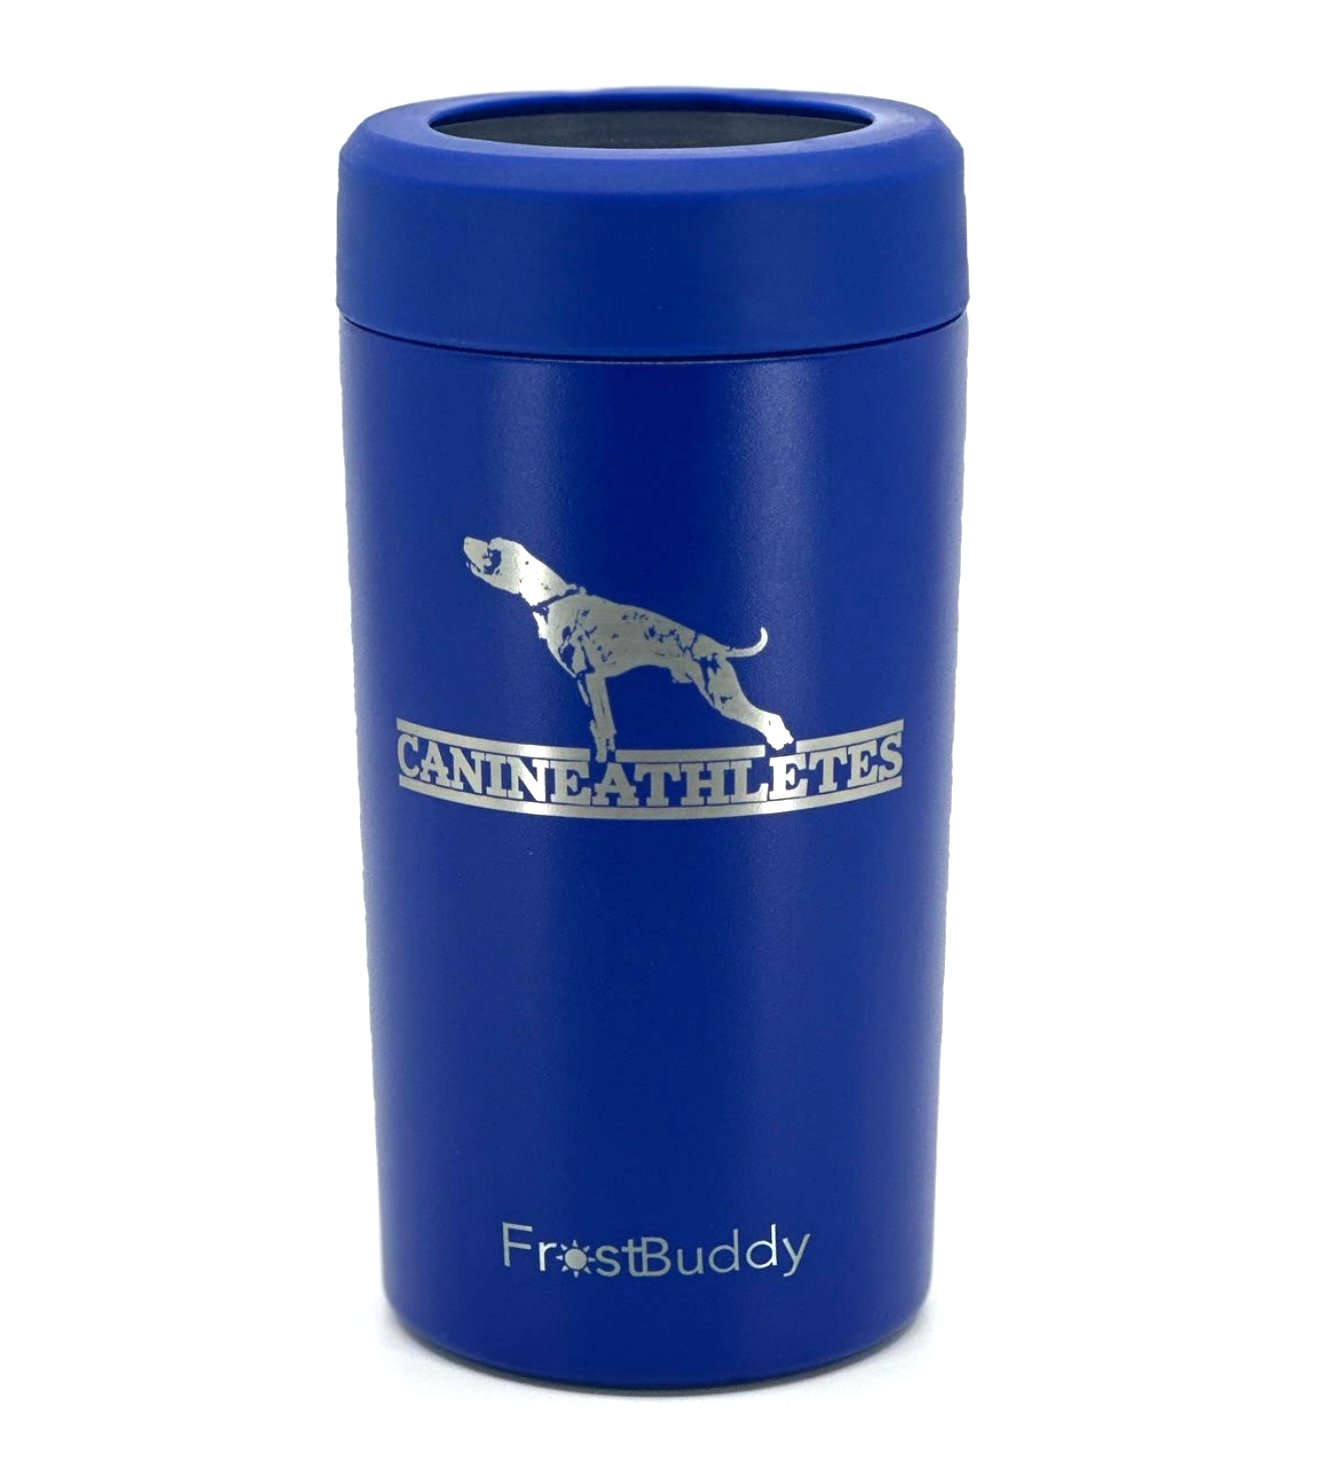 Gear Preview: Frost Buddy universal can cooler 